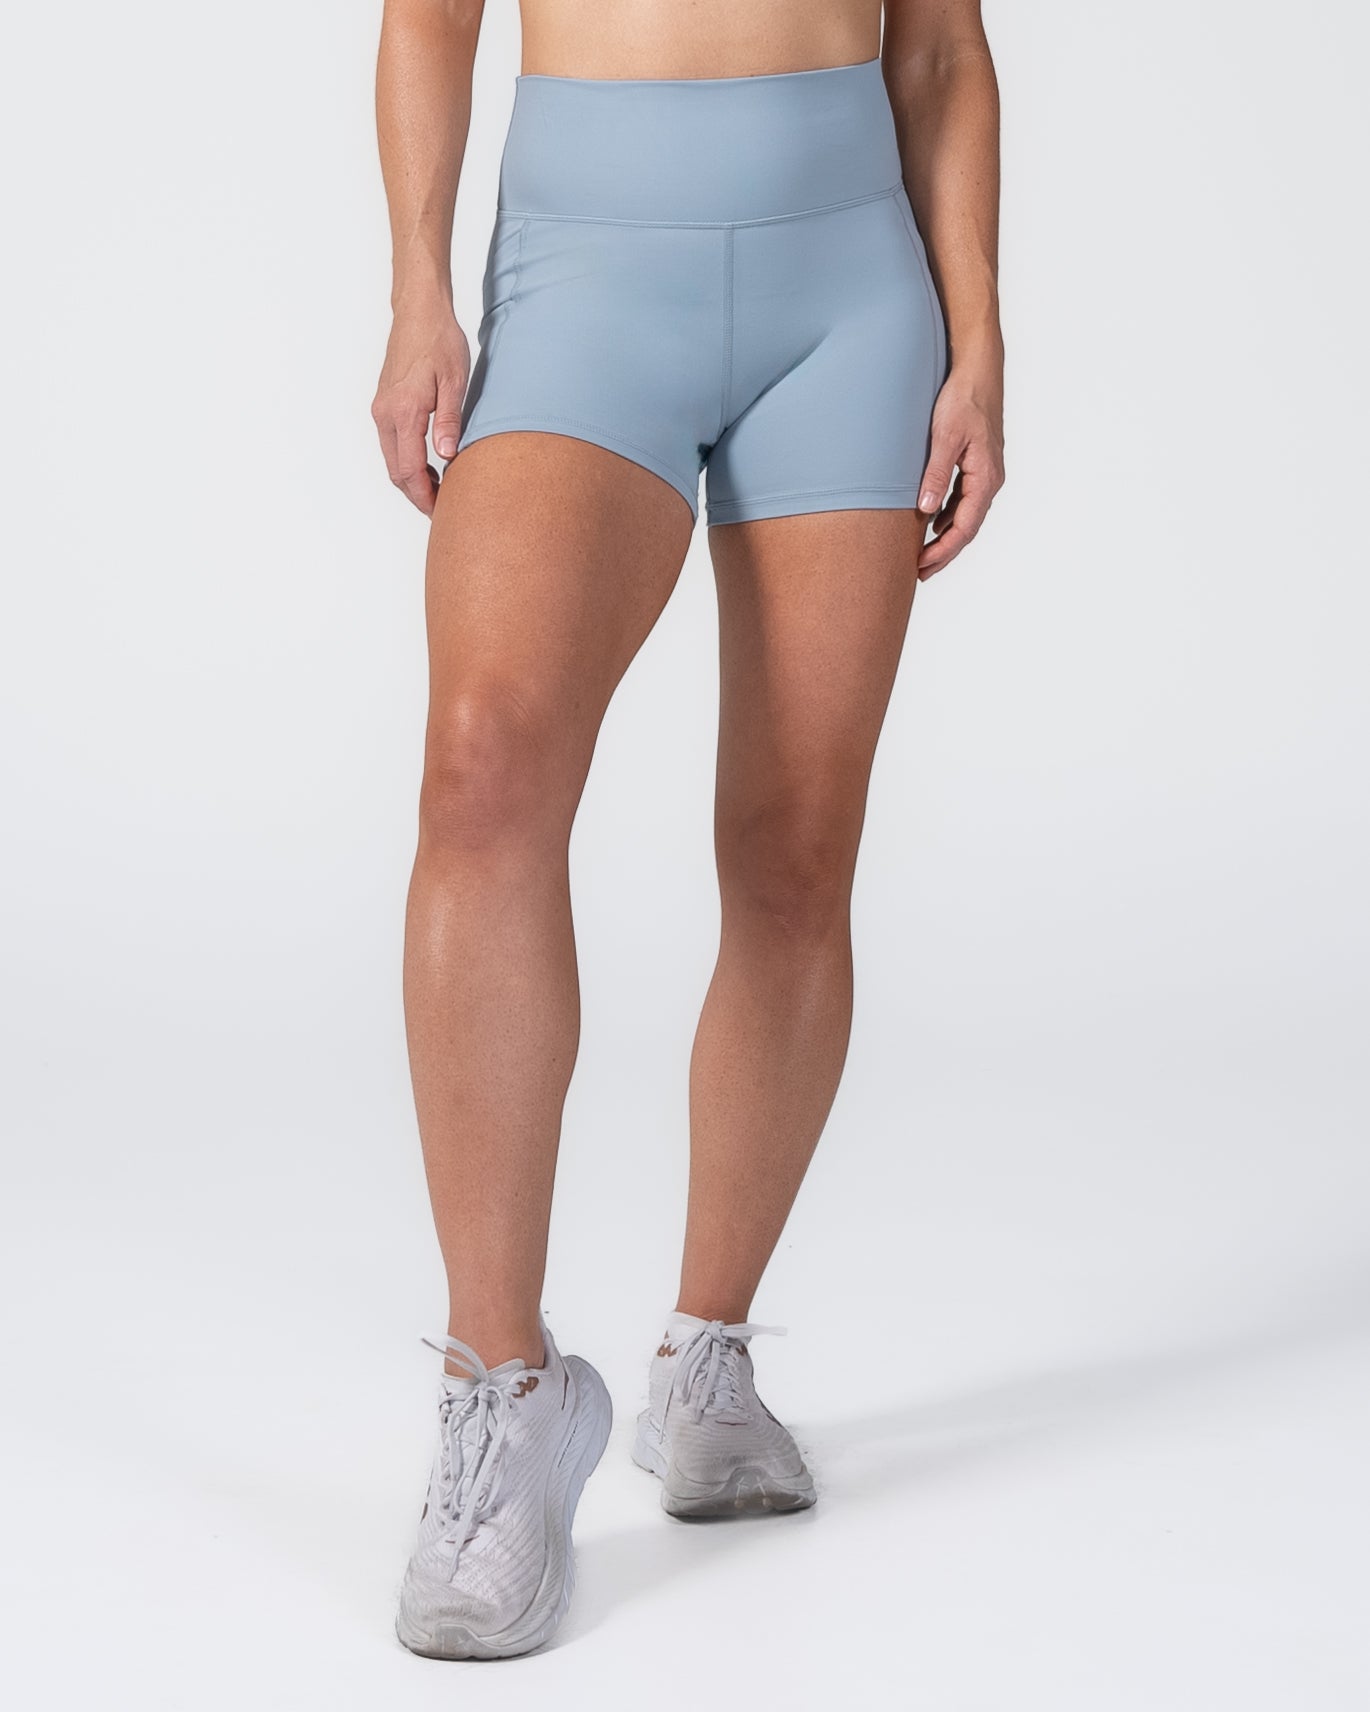 MM Lux High Waisted Rio Shorts (3.75 in. inseam) - Steel Blue